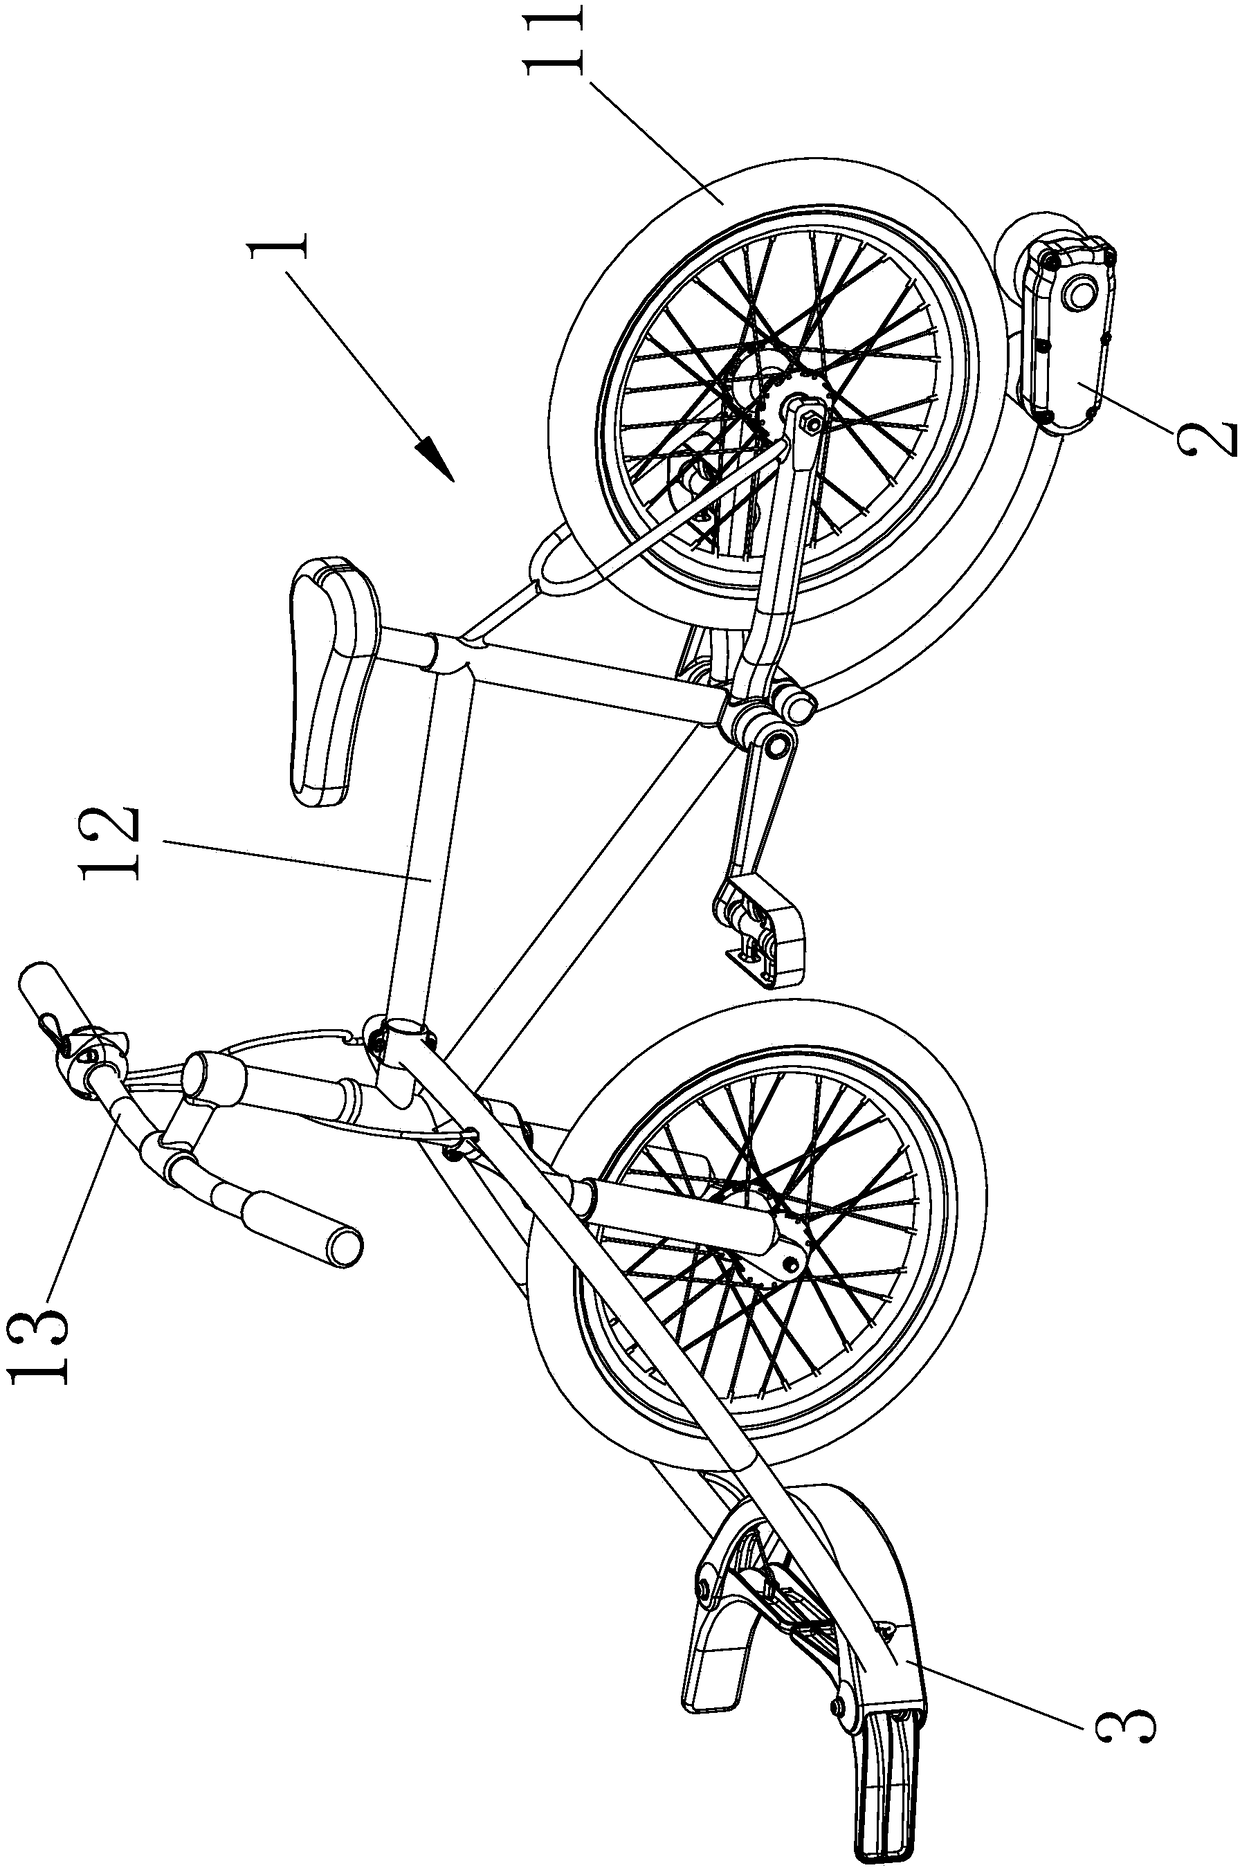 Bicycle ball game device